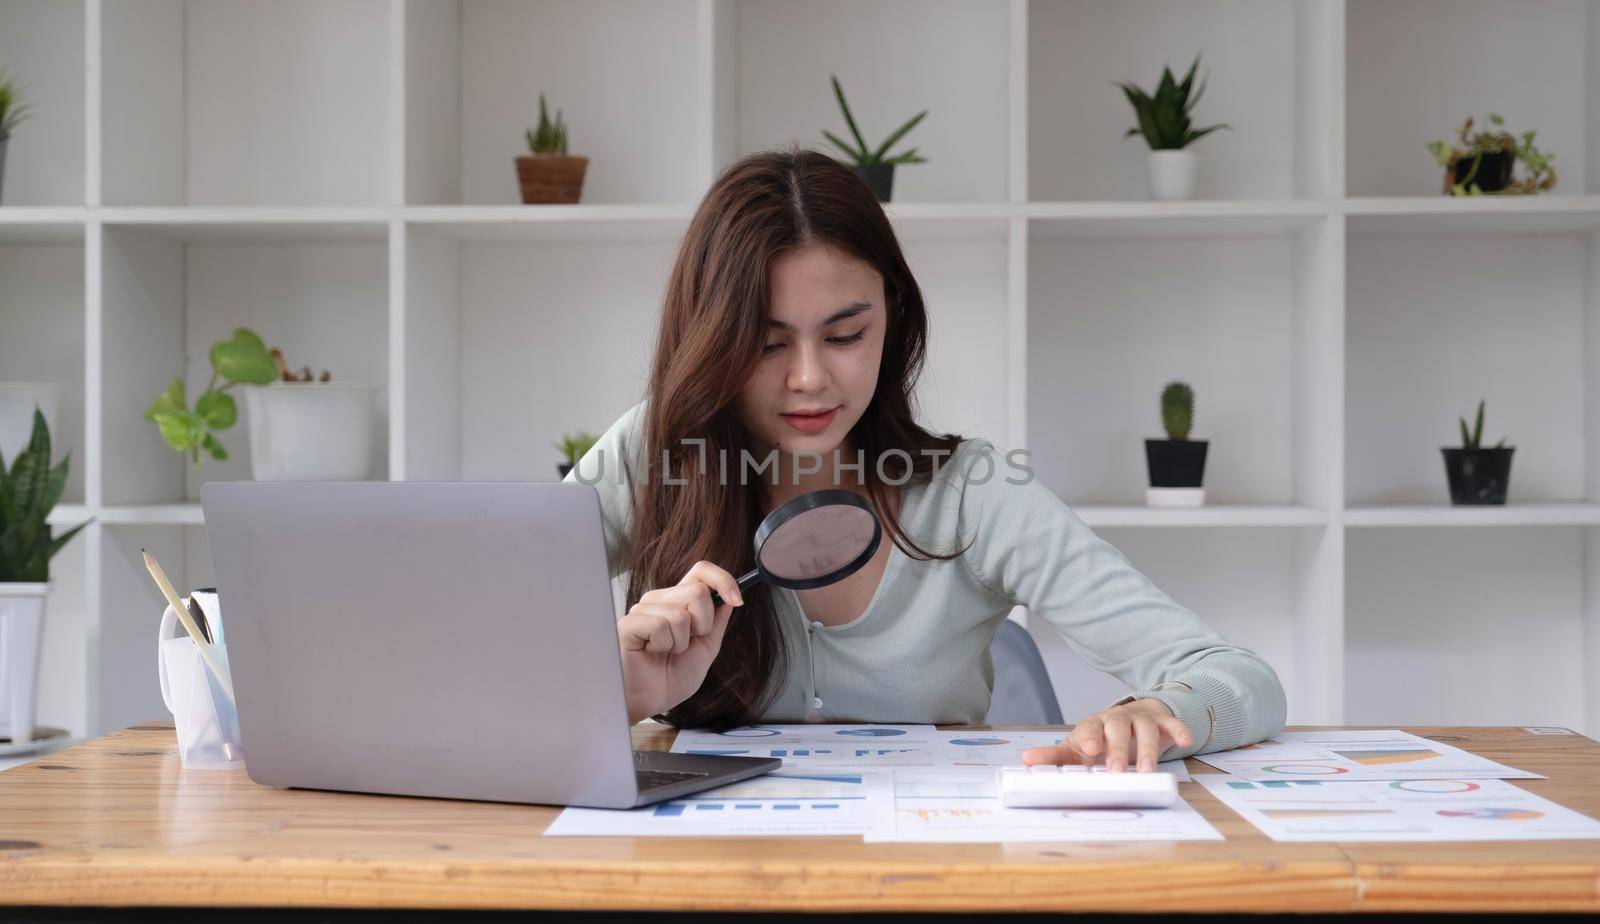 Tax inspector and financial auditor looking through magnifying glass, inspecting company financial papers, documents and reports.